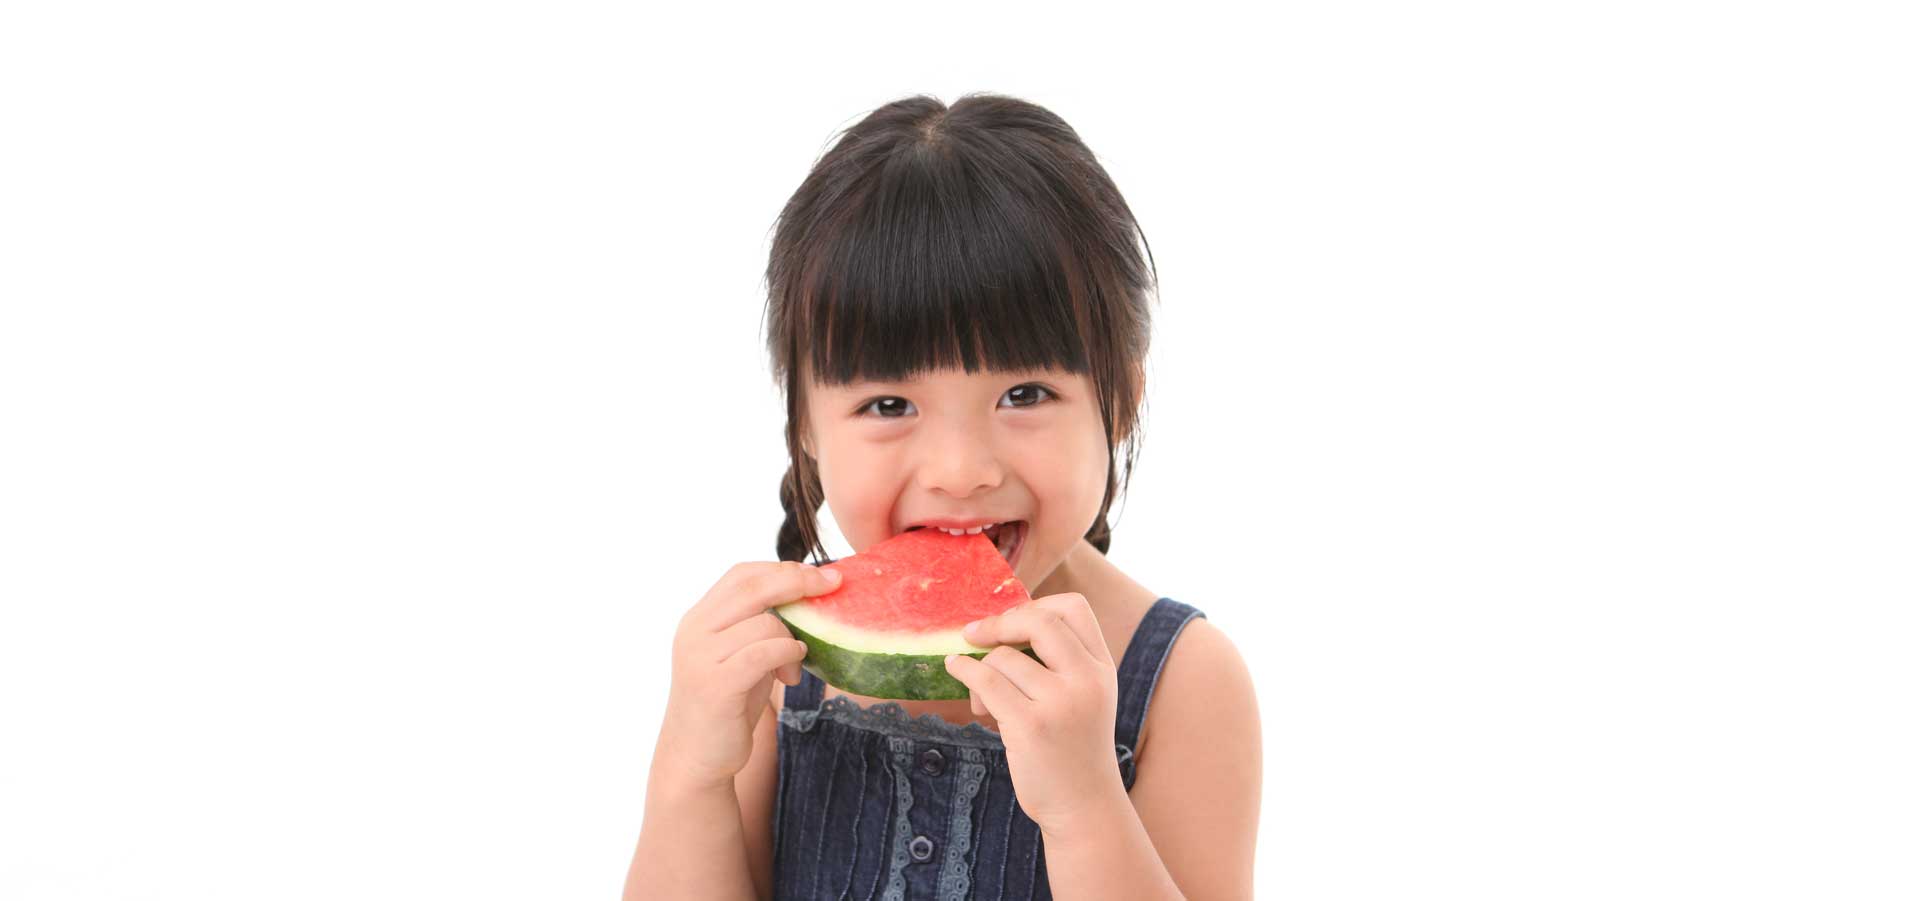 A young girl eating a slice of watermelon